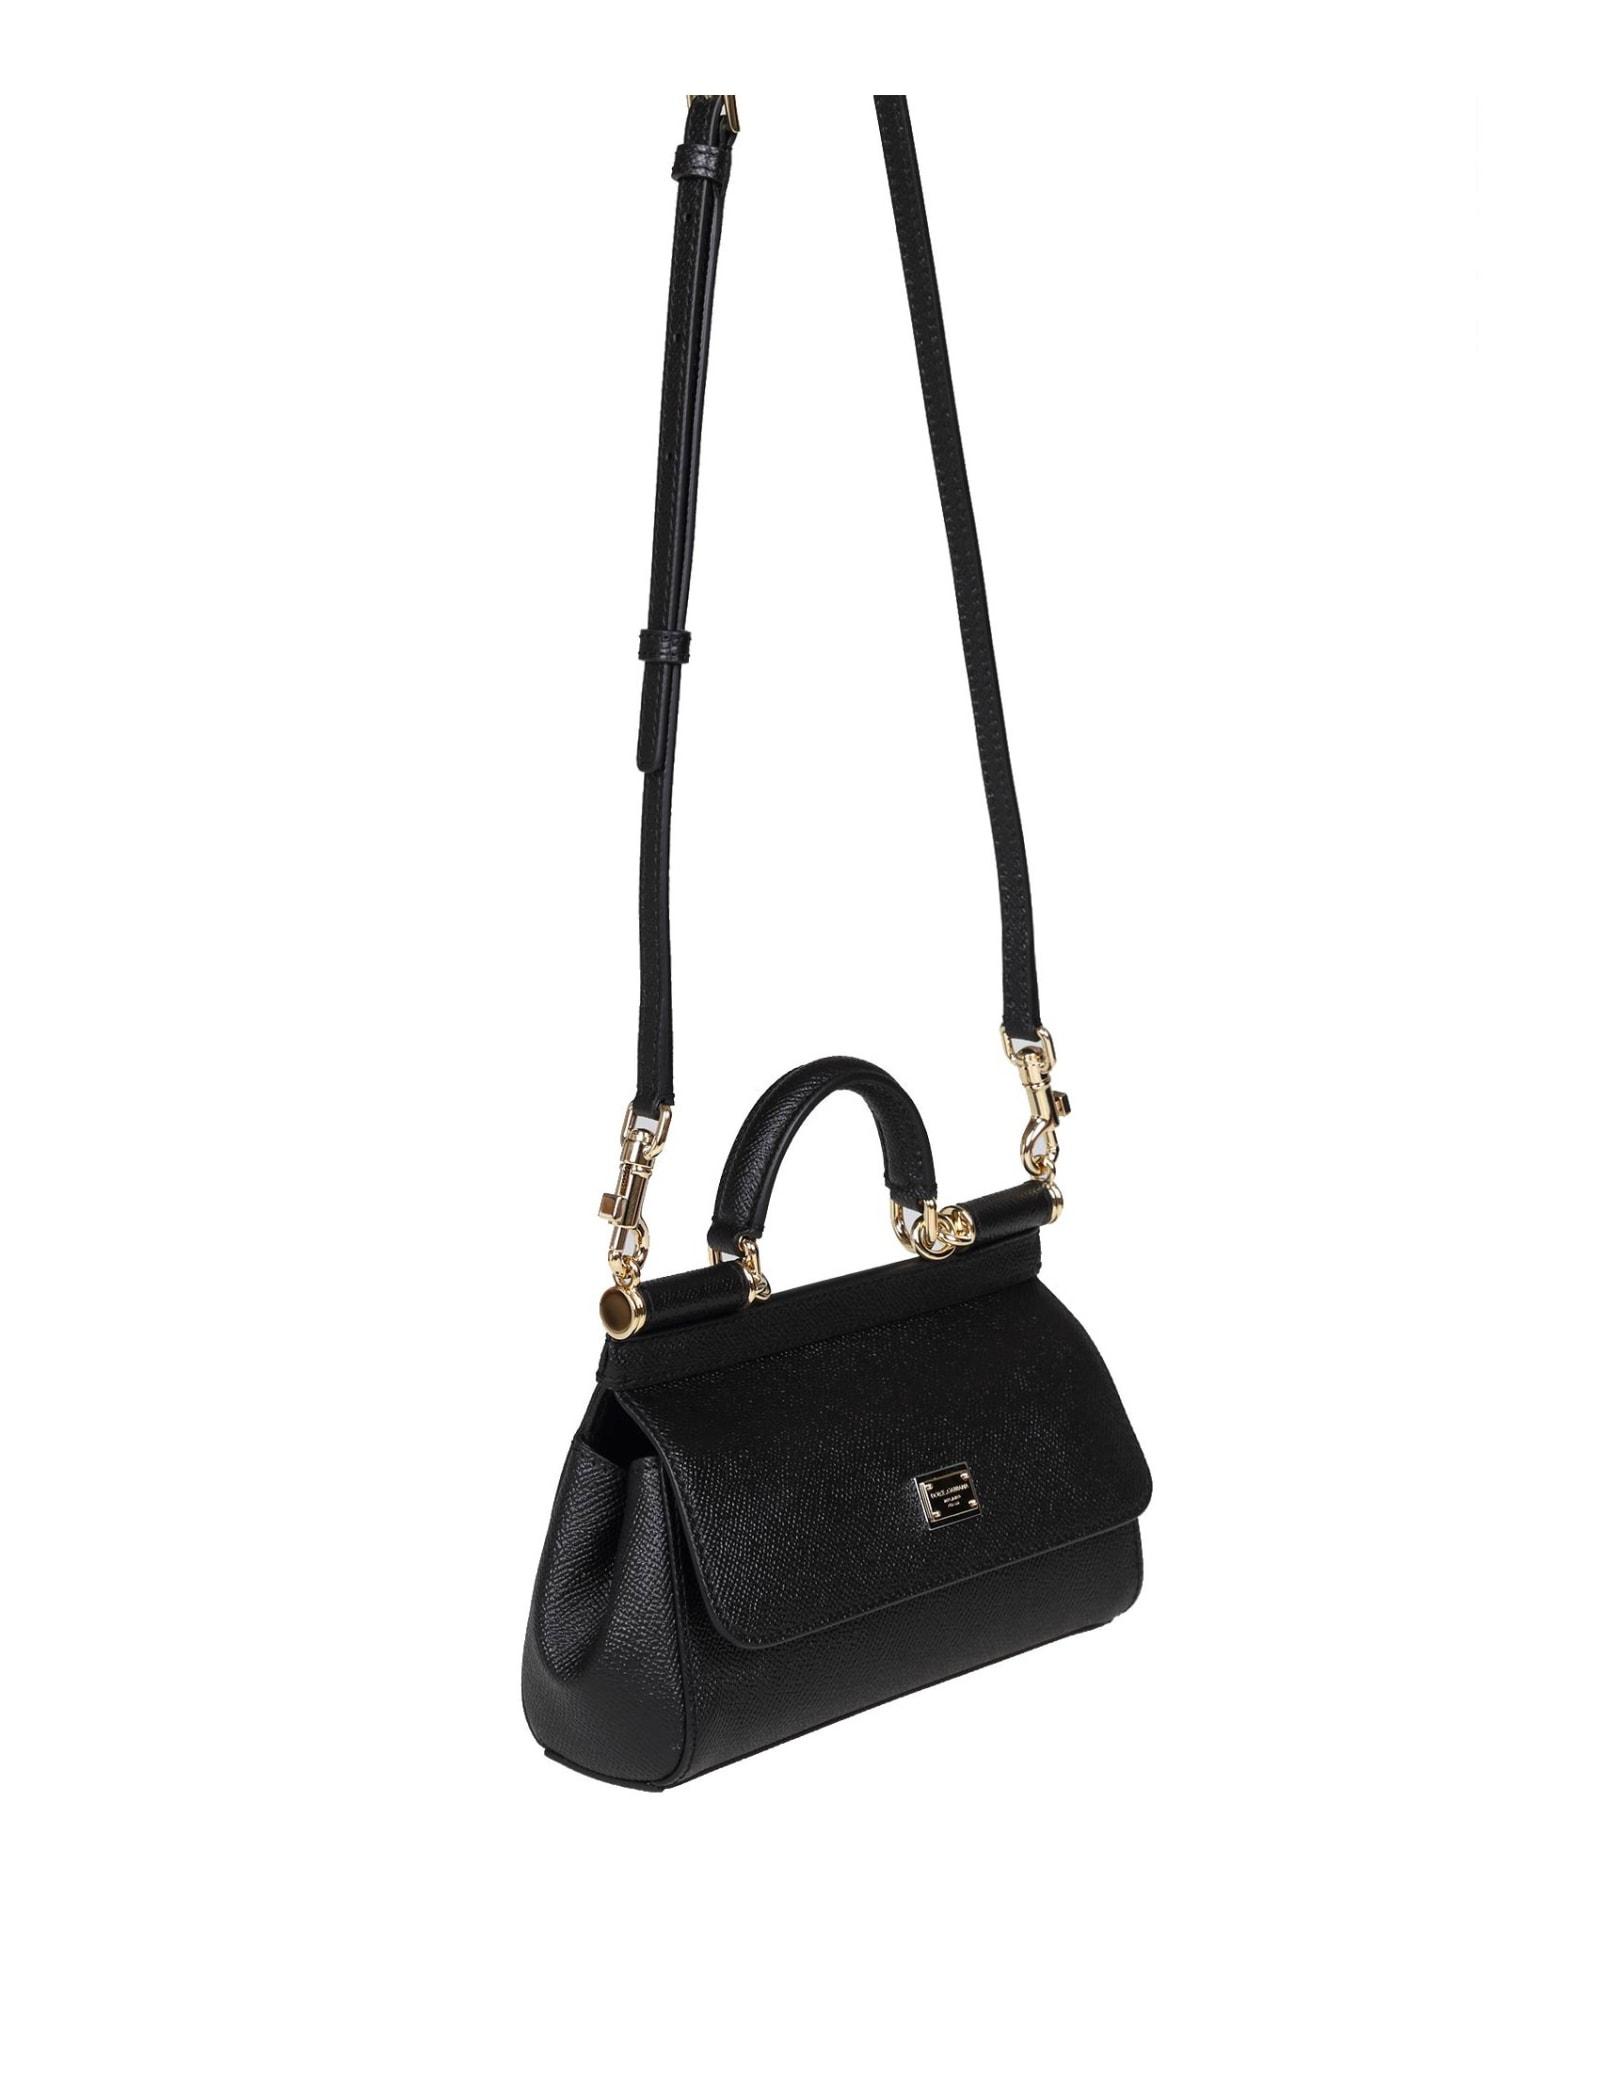 Dolce & Gabbana Small Sicily Bag In Dauphine Leather in Black